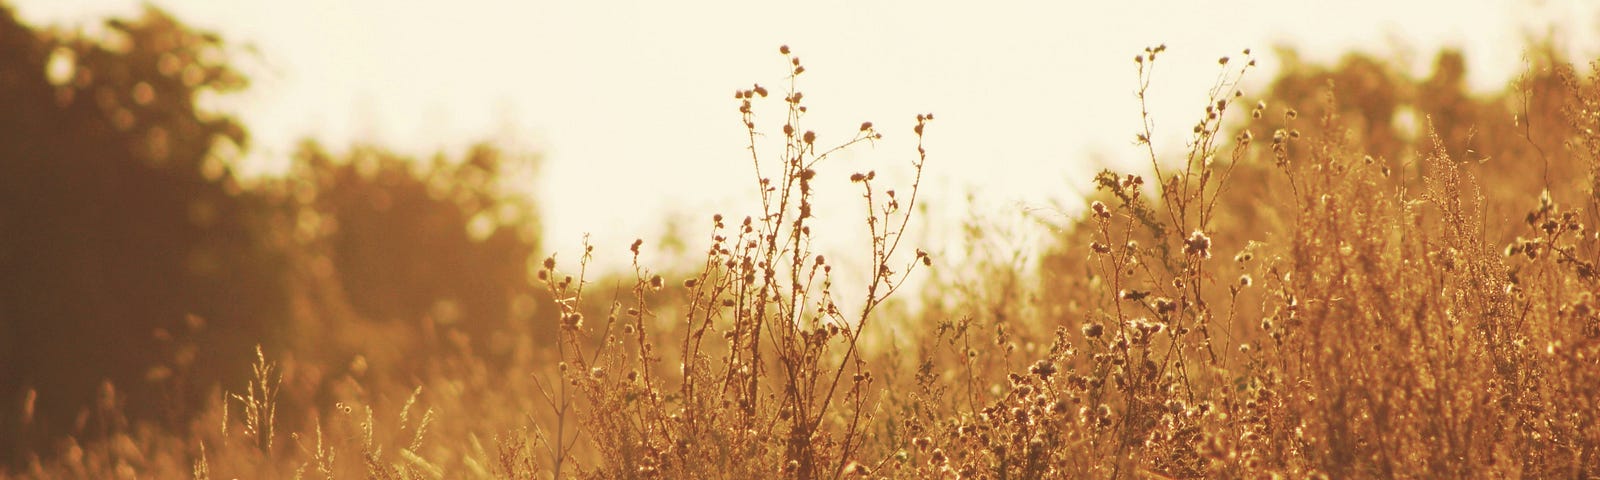 The picture shows wildflowers, not in bloom, in a sepia tone